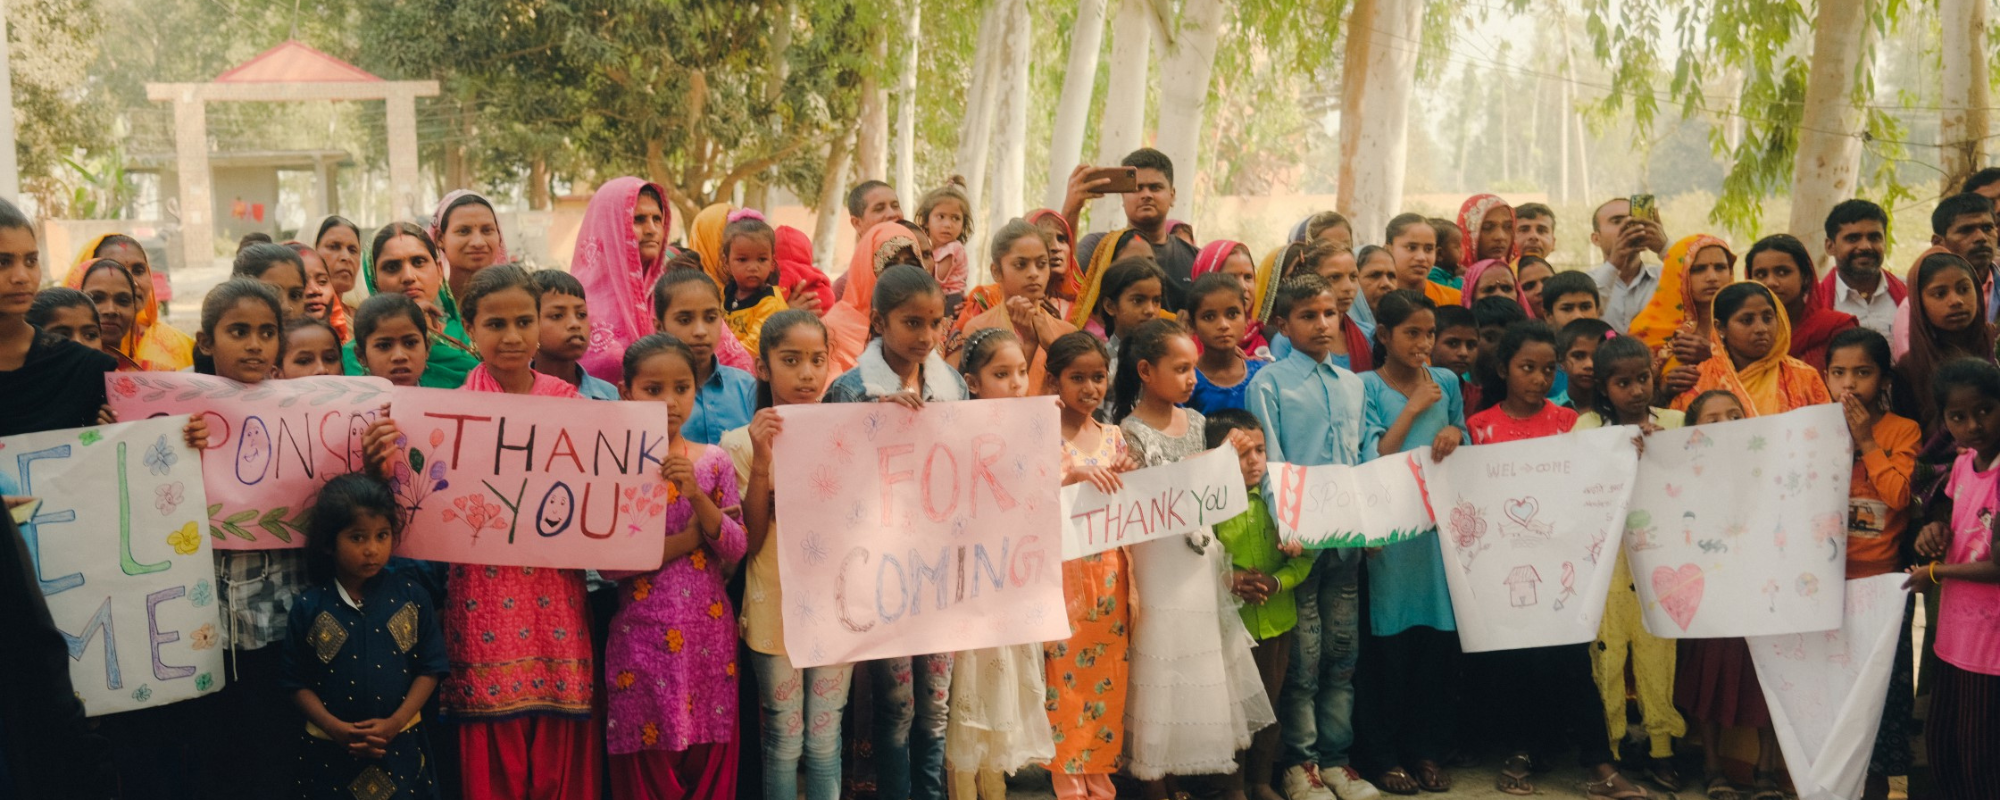 Group of children holding signs